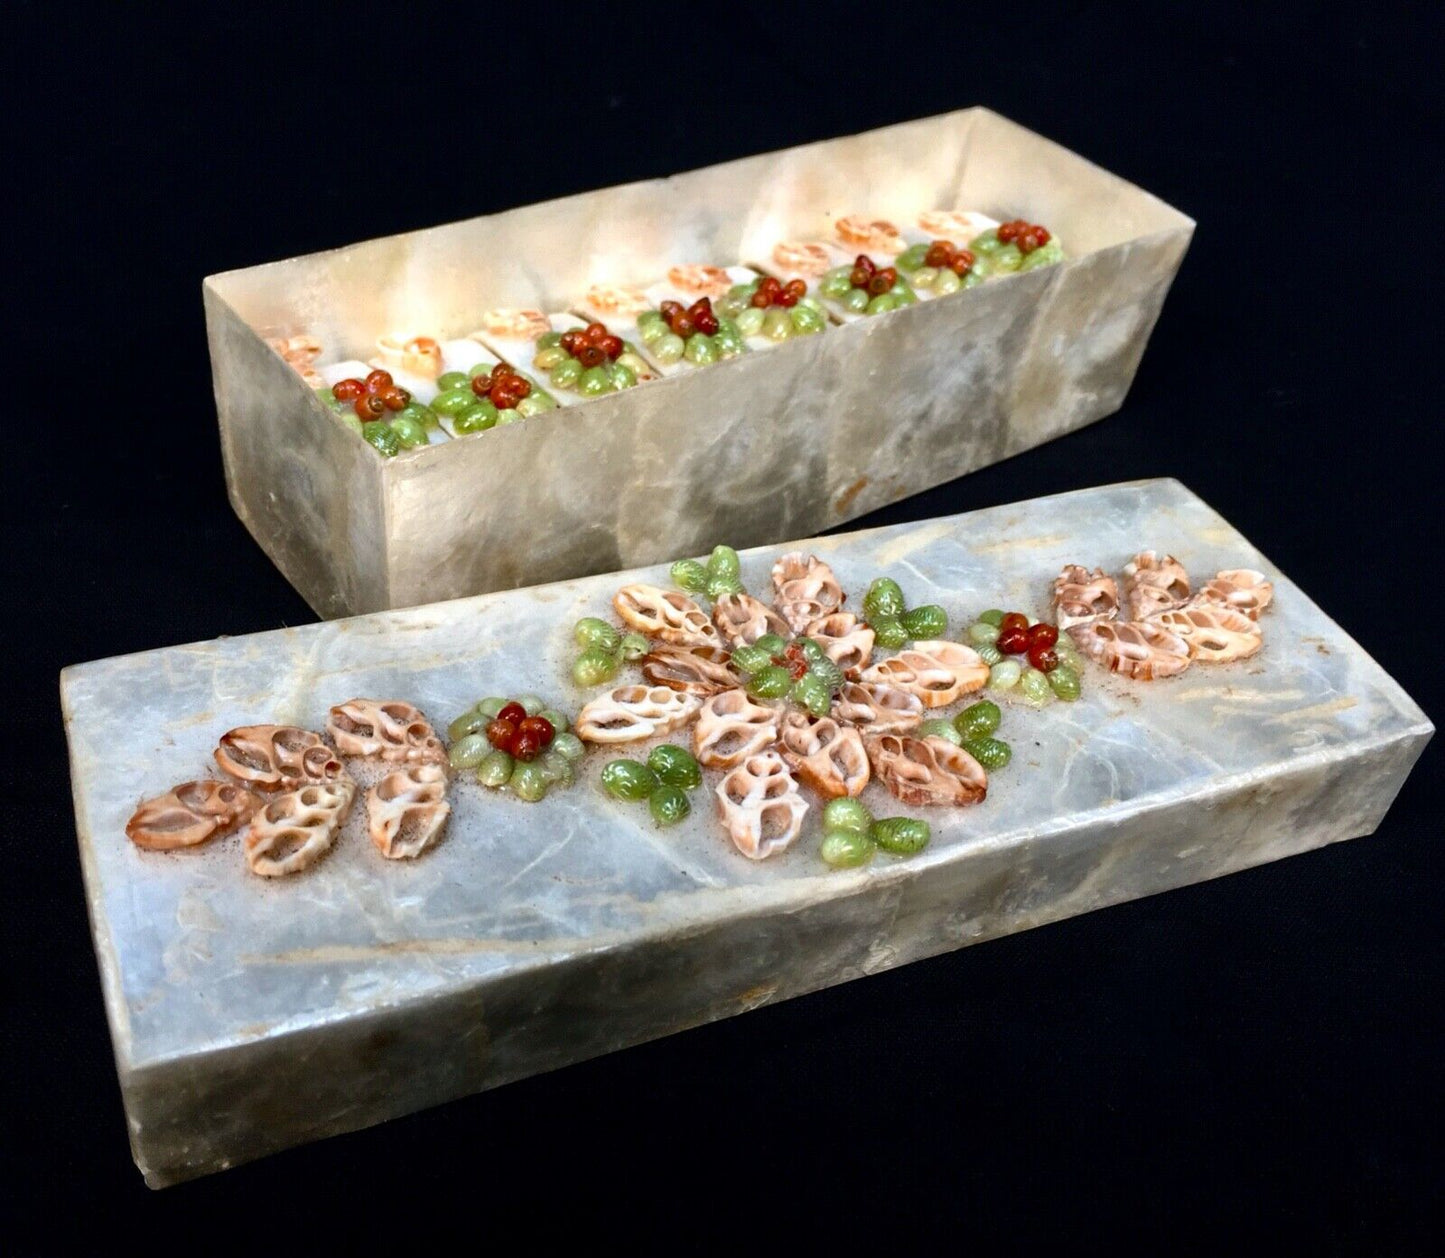 Antique Set of 8 Mother of Pearl Napkin Rings in Original Box with Shell Design